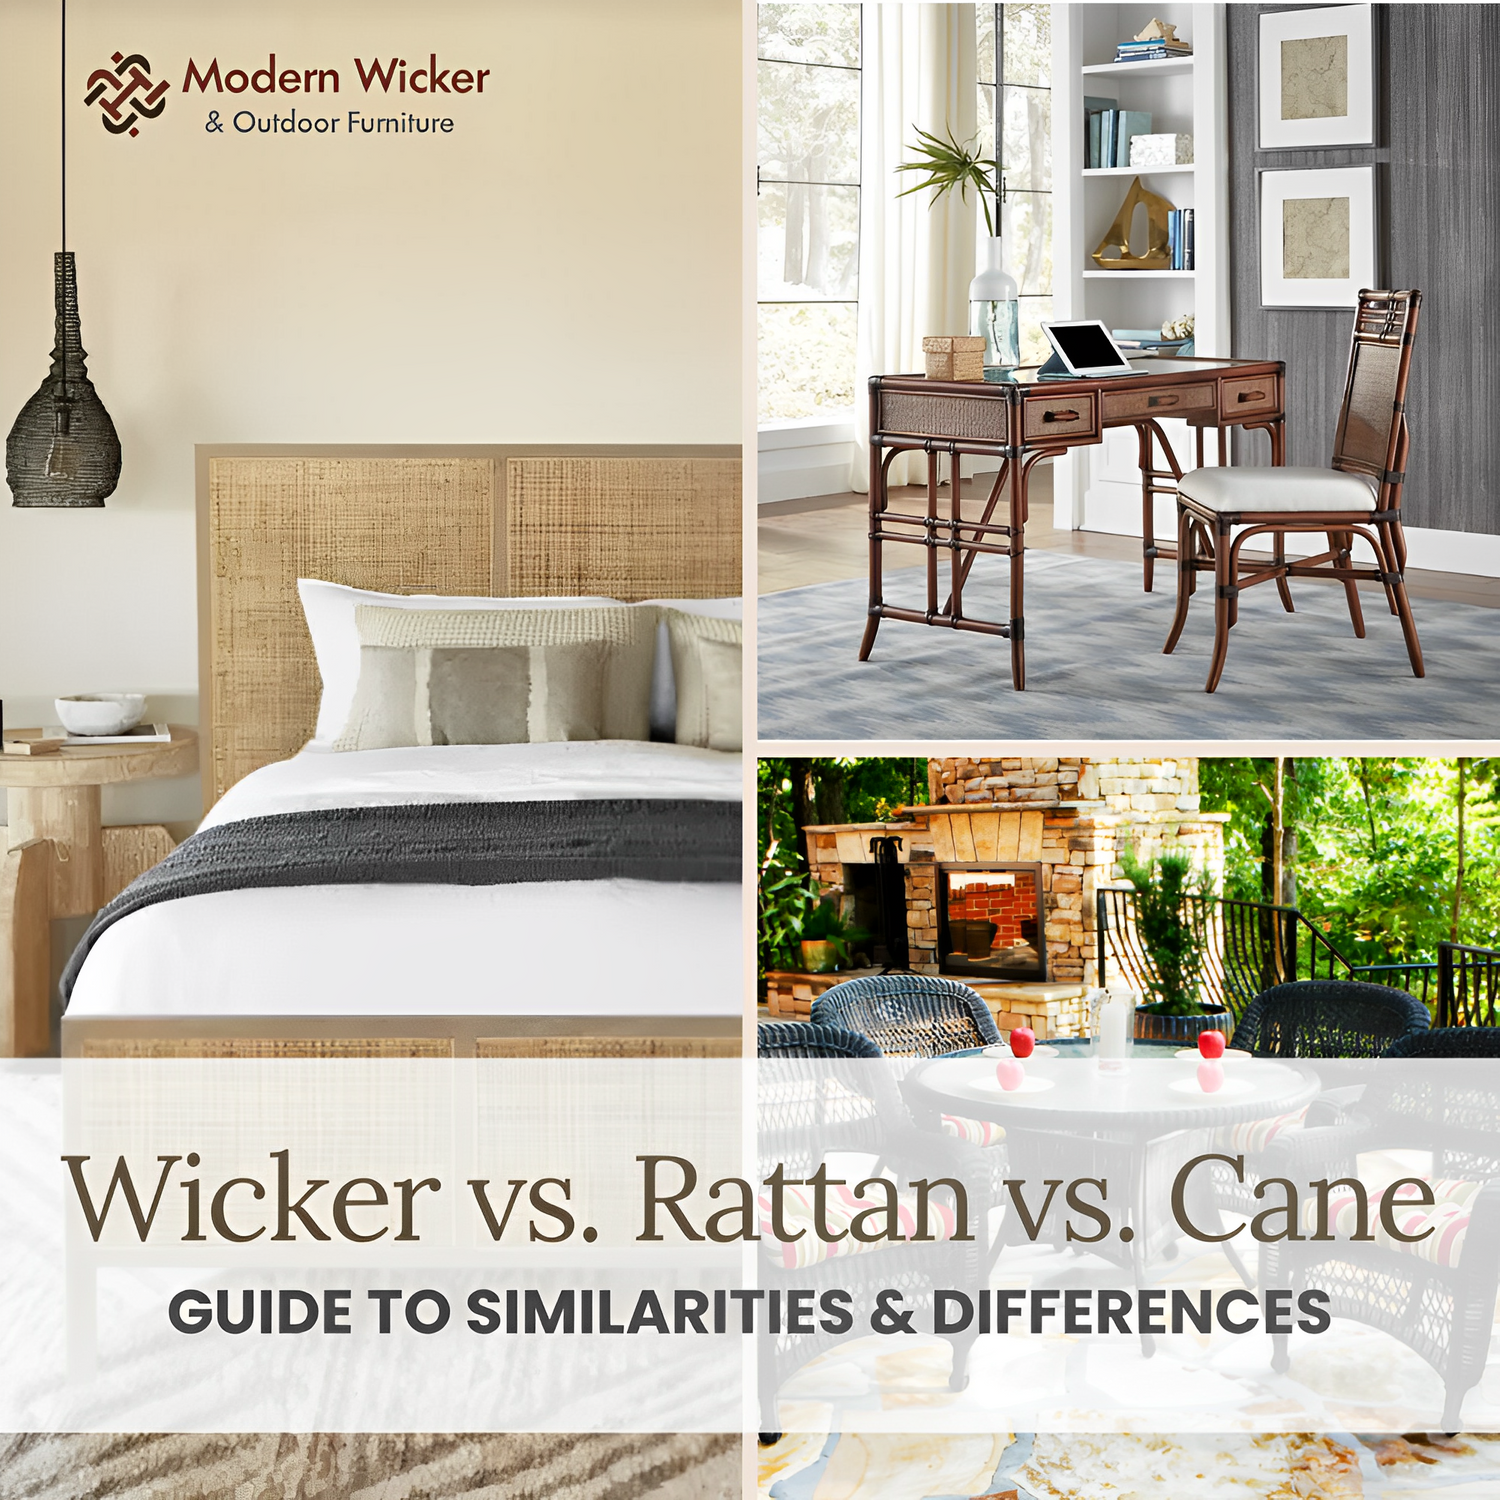 Wicker vs. Rattan vs. Cane: Guide to Similarities & Differences